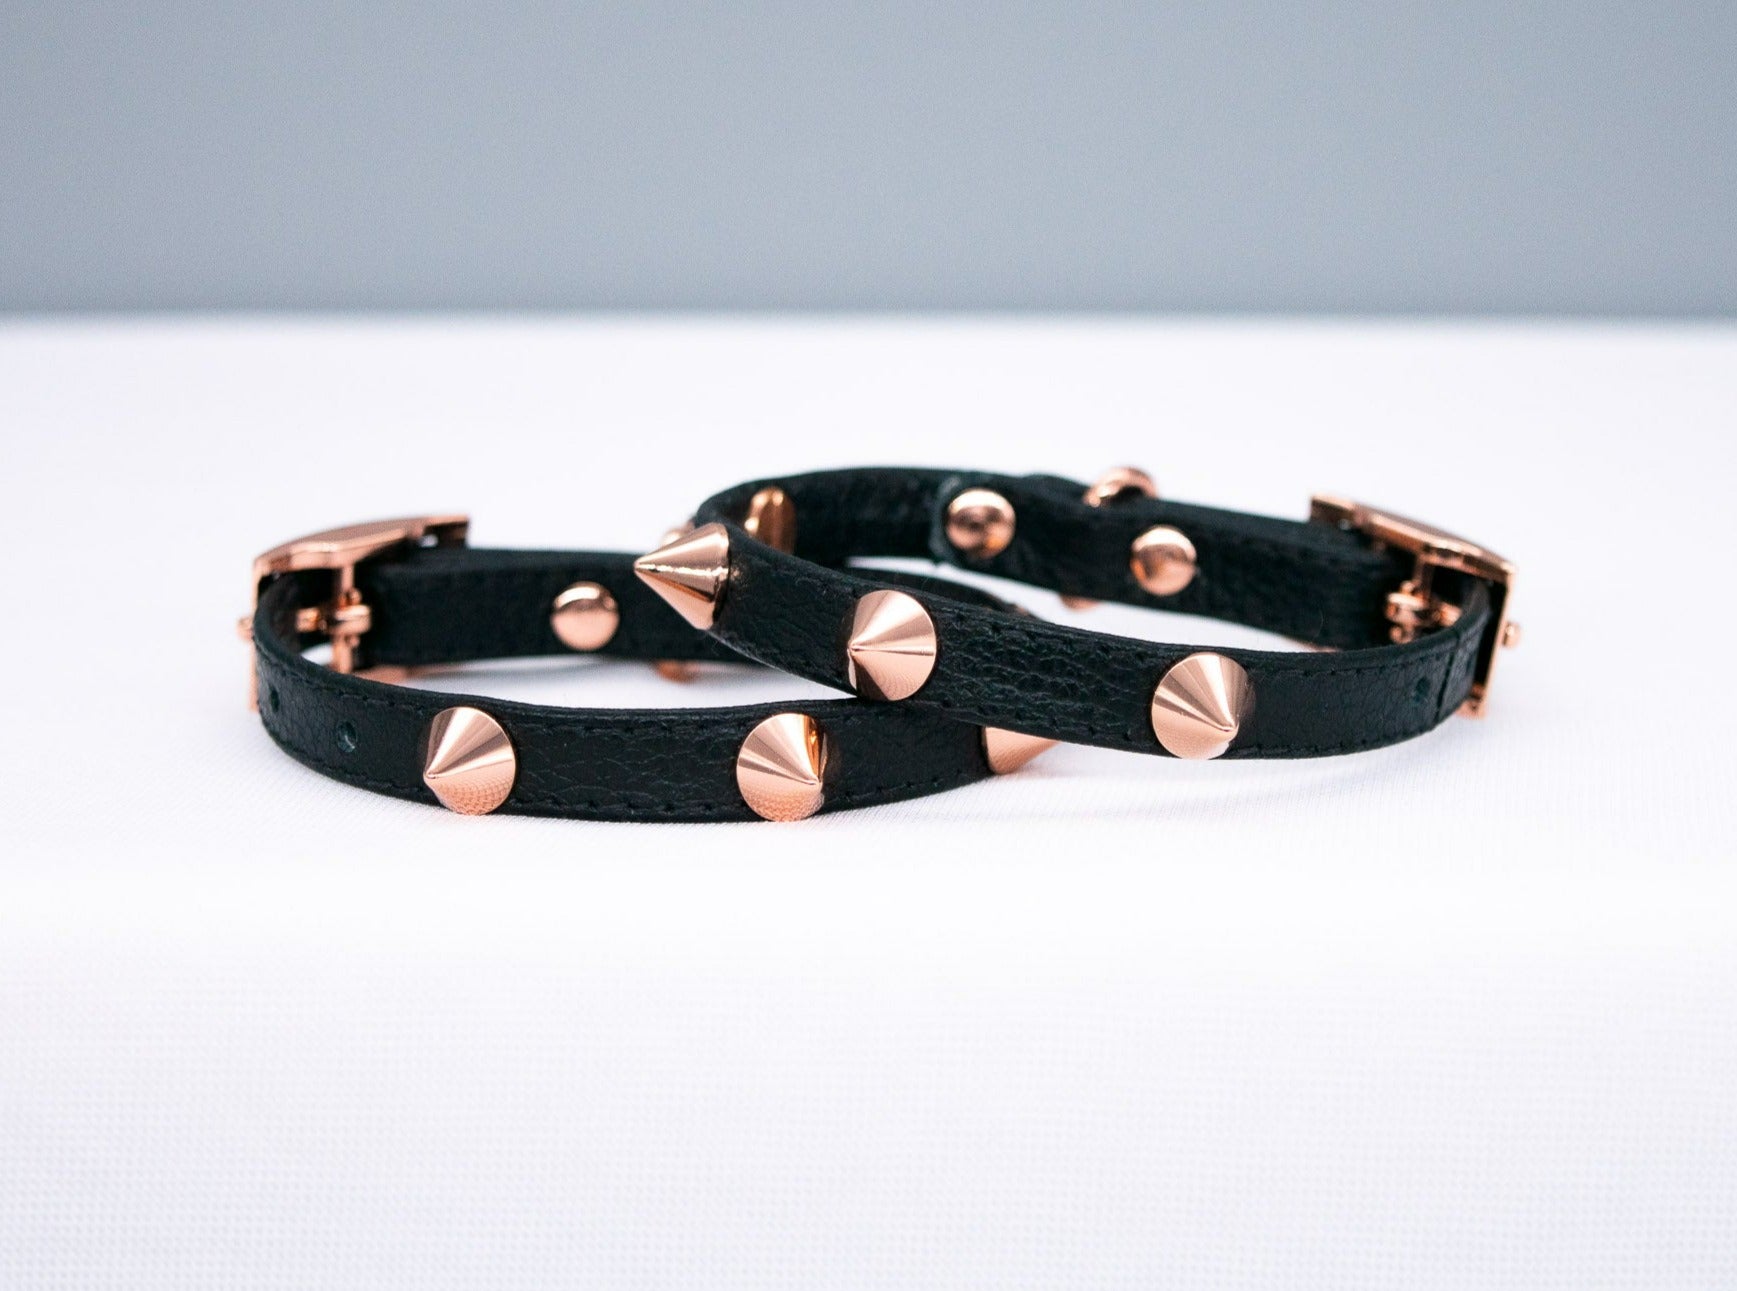 3/8" Black Leather Spiked Cuffs